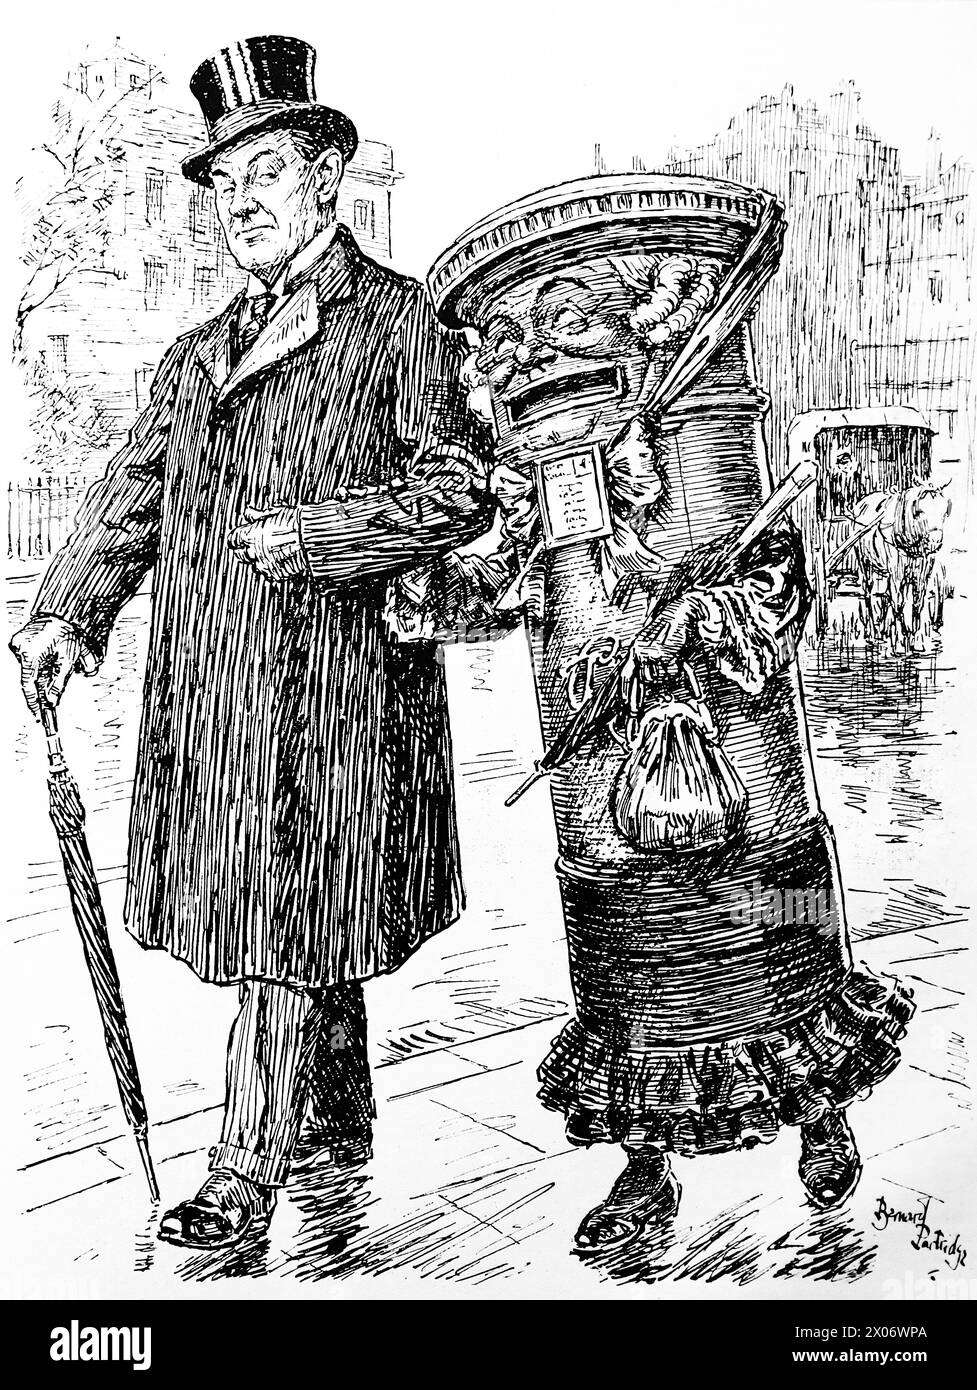 Penny-Halfpenny Wise by Bernard Partridge, 19 November 1924, showing a lady mailbox asking Stanley Baldwin if he will reduce postal rates. Photograph from a line drawing originally printed in the Punch and London Charivari periodical in 1924. This is a good example of the skilful artists and the humour and satire of the time. Stock Photo